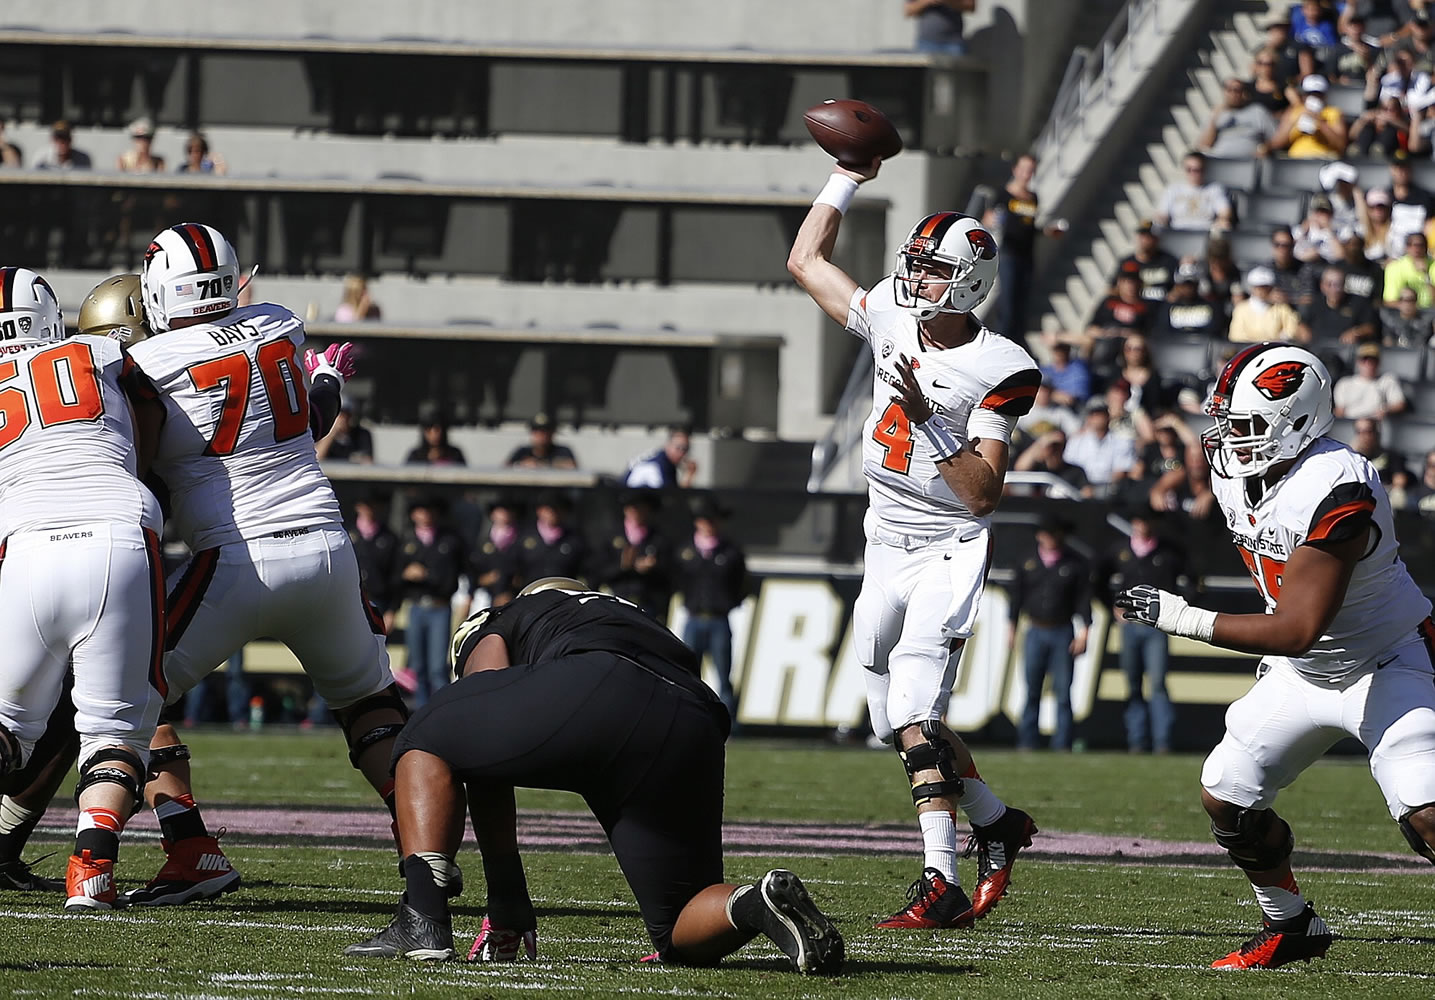 Oregon State quarterback Sean Mannion throws during the first half of an NCAA college football game against Colorado in Boulder, Colo., Saturday, Oct. 4, 2014.